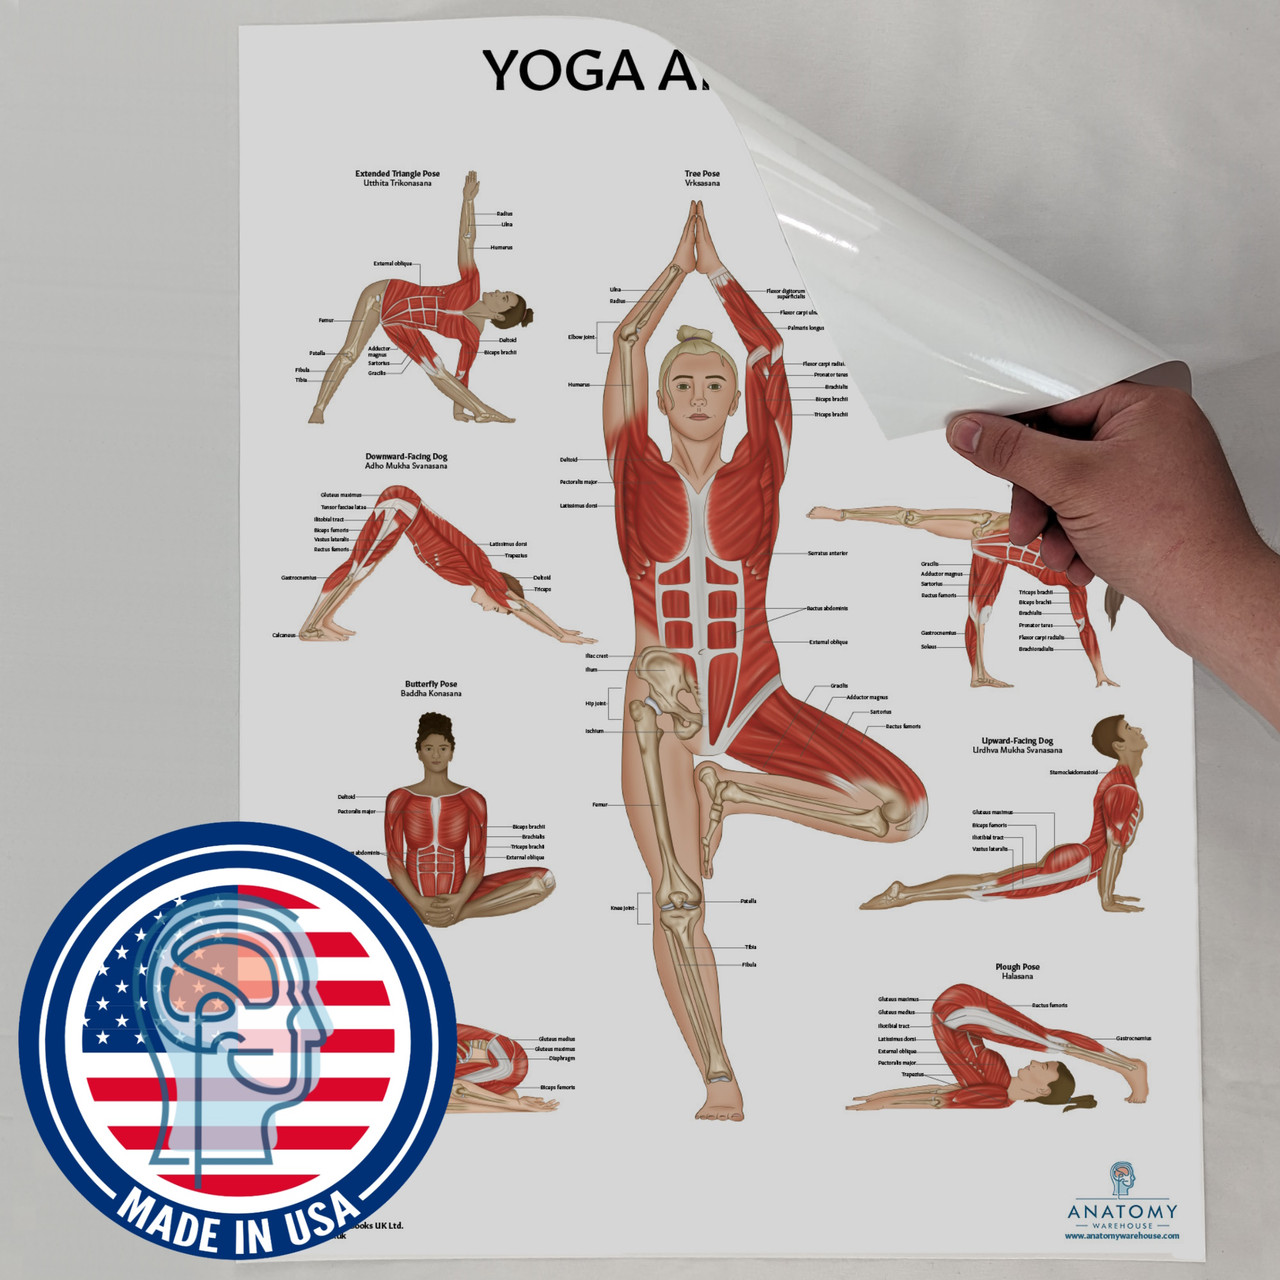 Lab No. 4 Seated Yoga Asanas Poses In 12 x 18 Inches Poster